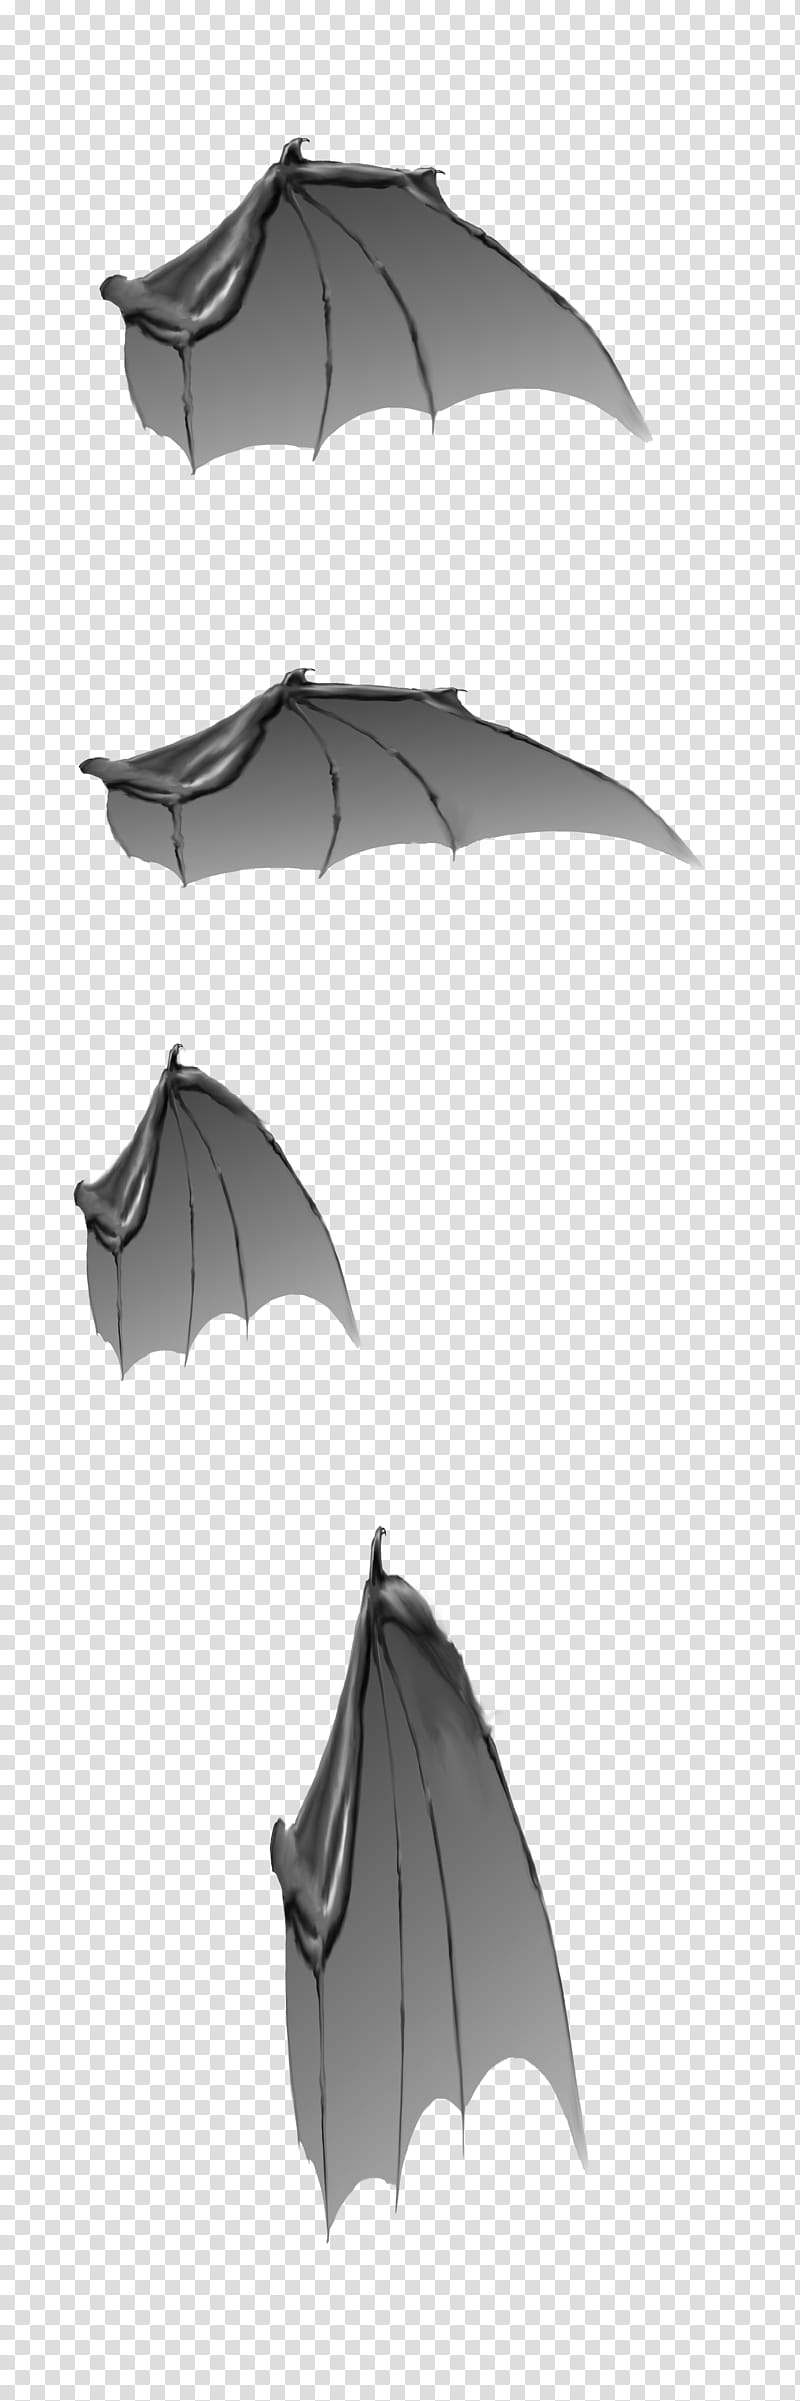 Dragonwing bases, gray bat wings transparent background PNG clipart